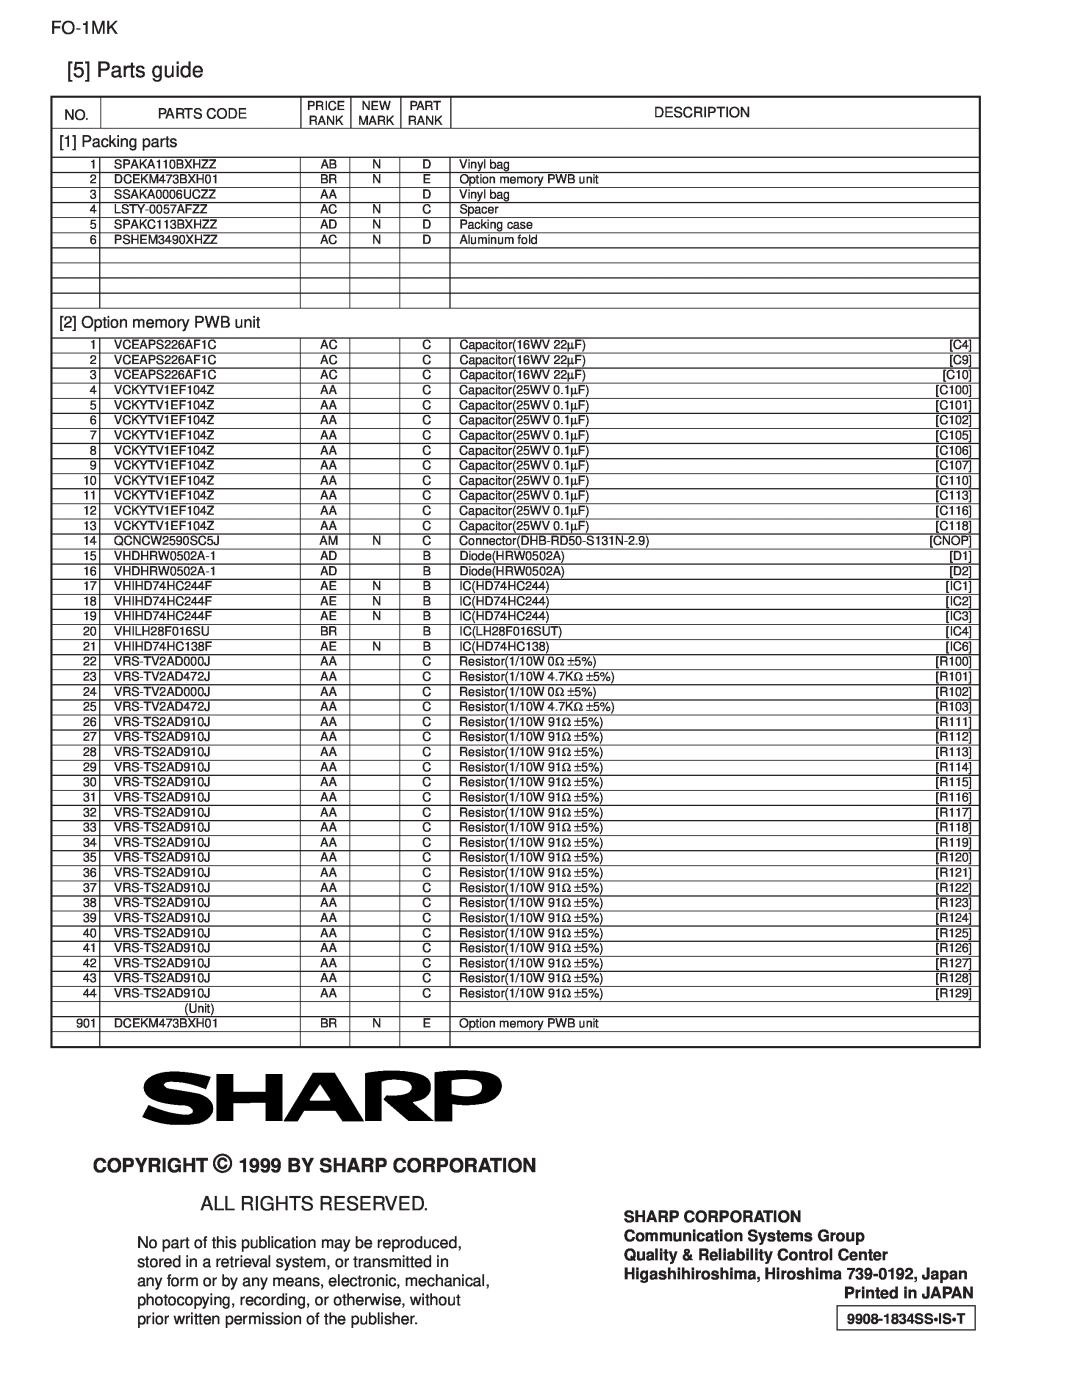 Sharp FO-1MK Parts guide, All Rights Reserved, Packing parts, Option memory PWB unit, COPYRIGHT 1999 BY SHARP CORPORATION 